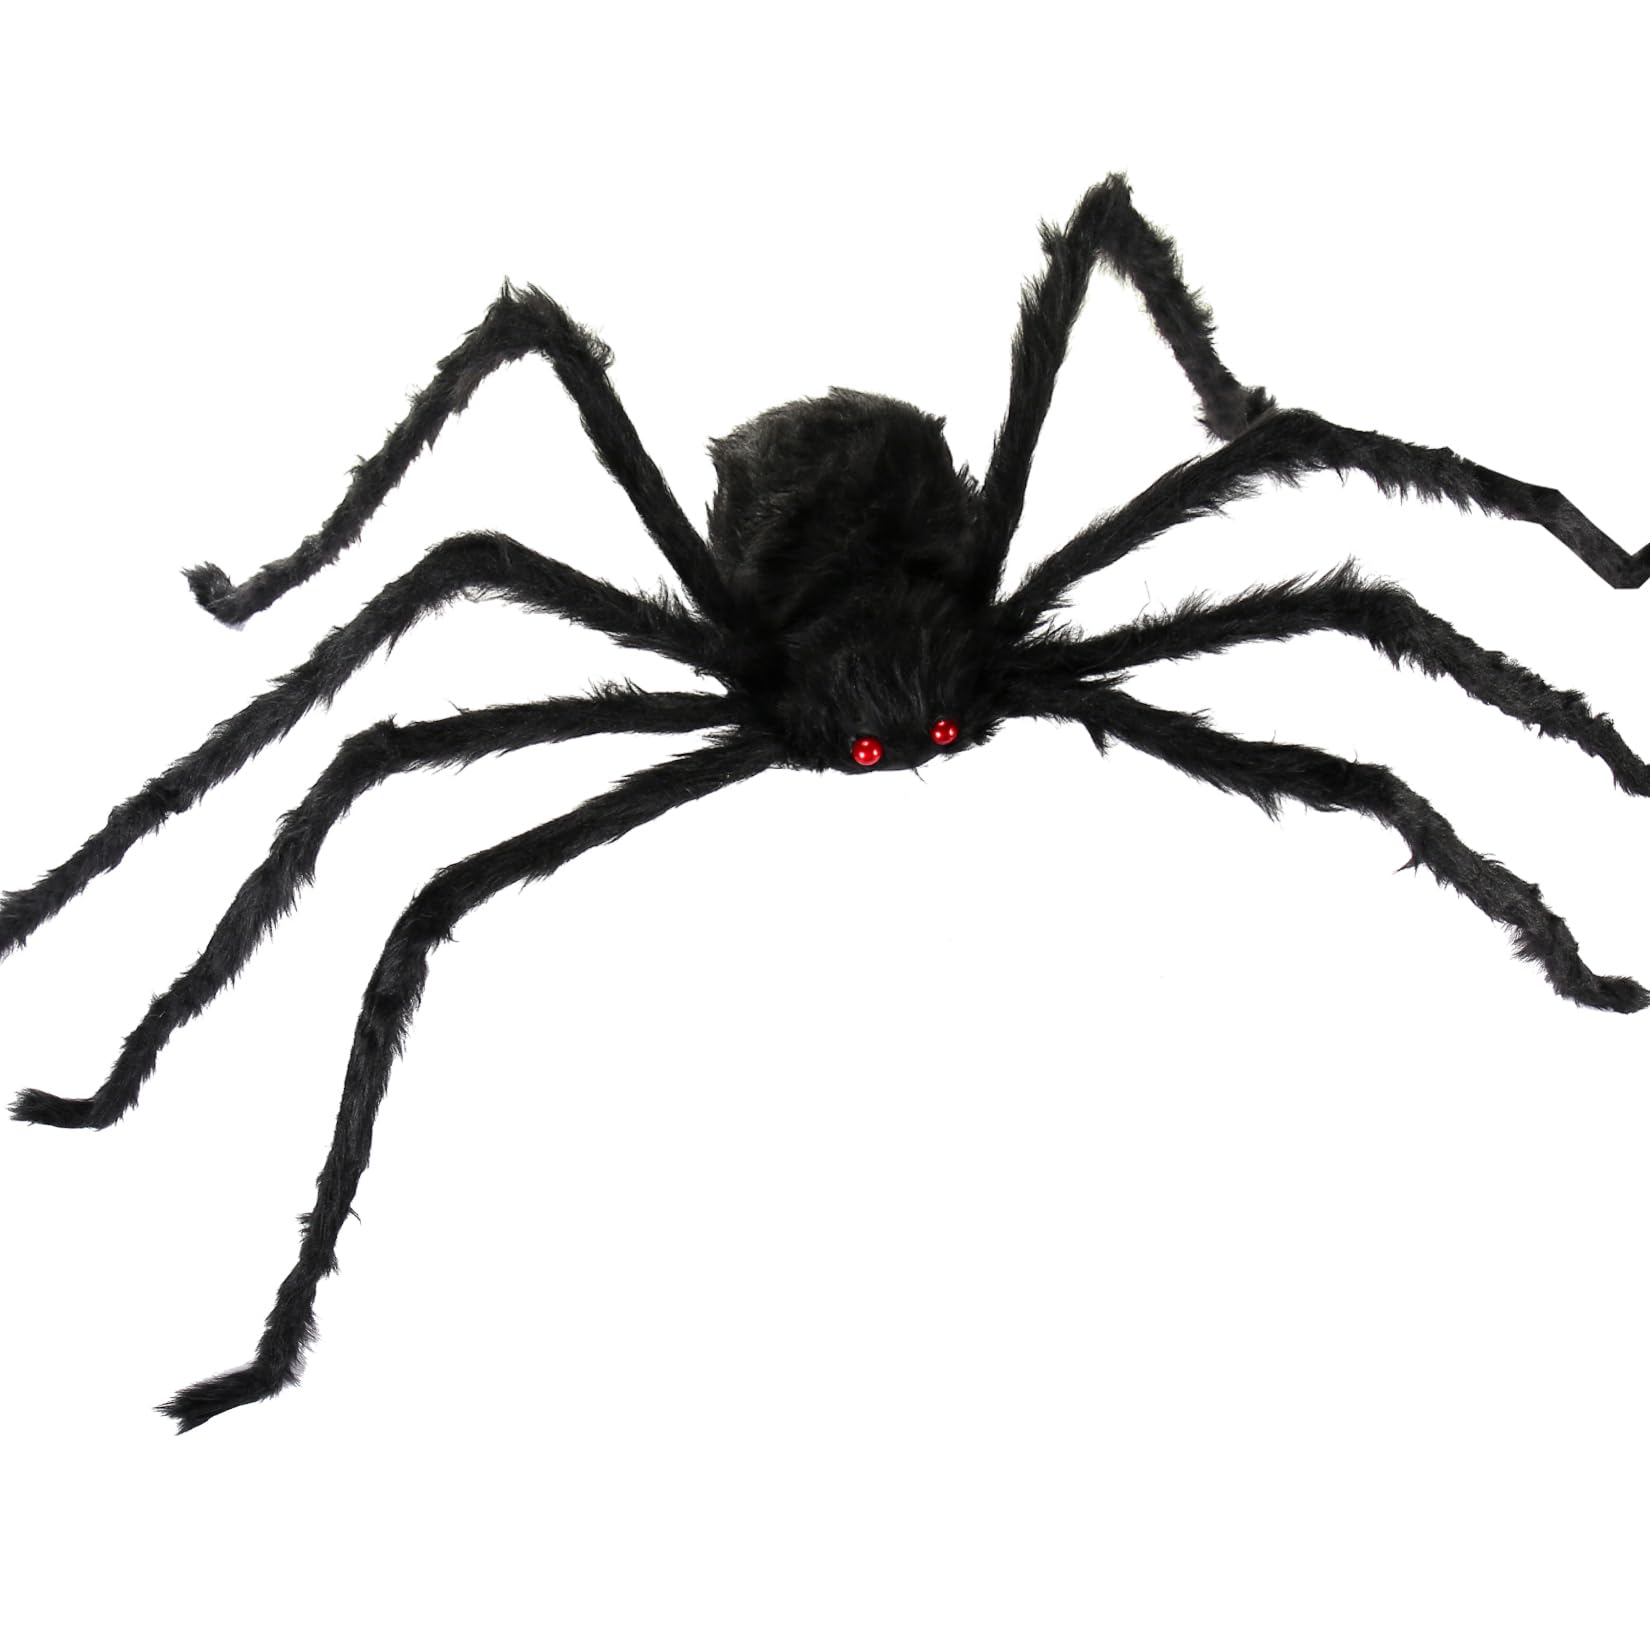 6.6ft Giant Spider for Halloween Decorations Large Black Grey Hairy Spider for Scary Indoor Outdoor Yard Garden Porch Outside Haunted House Decor